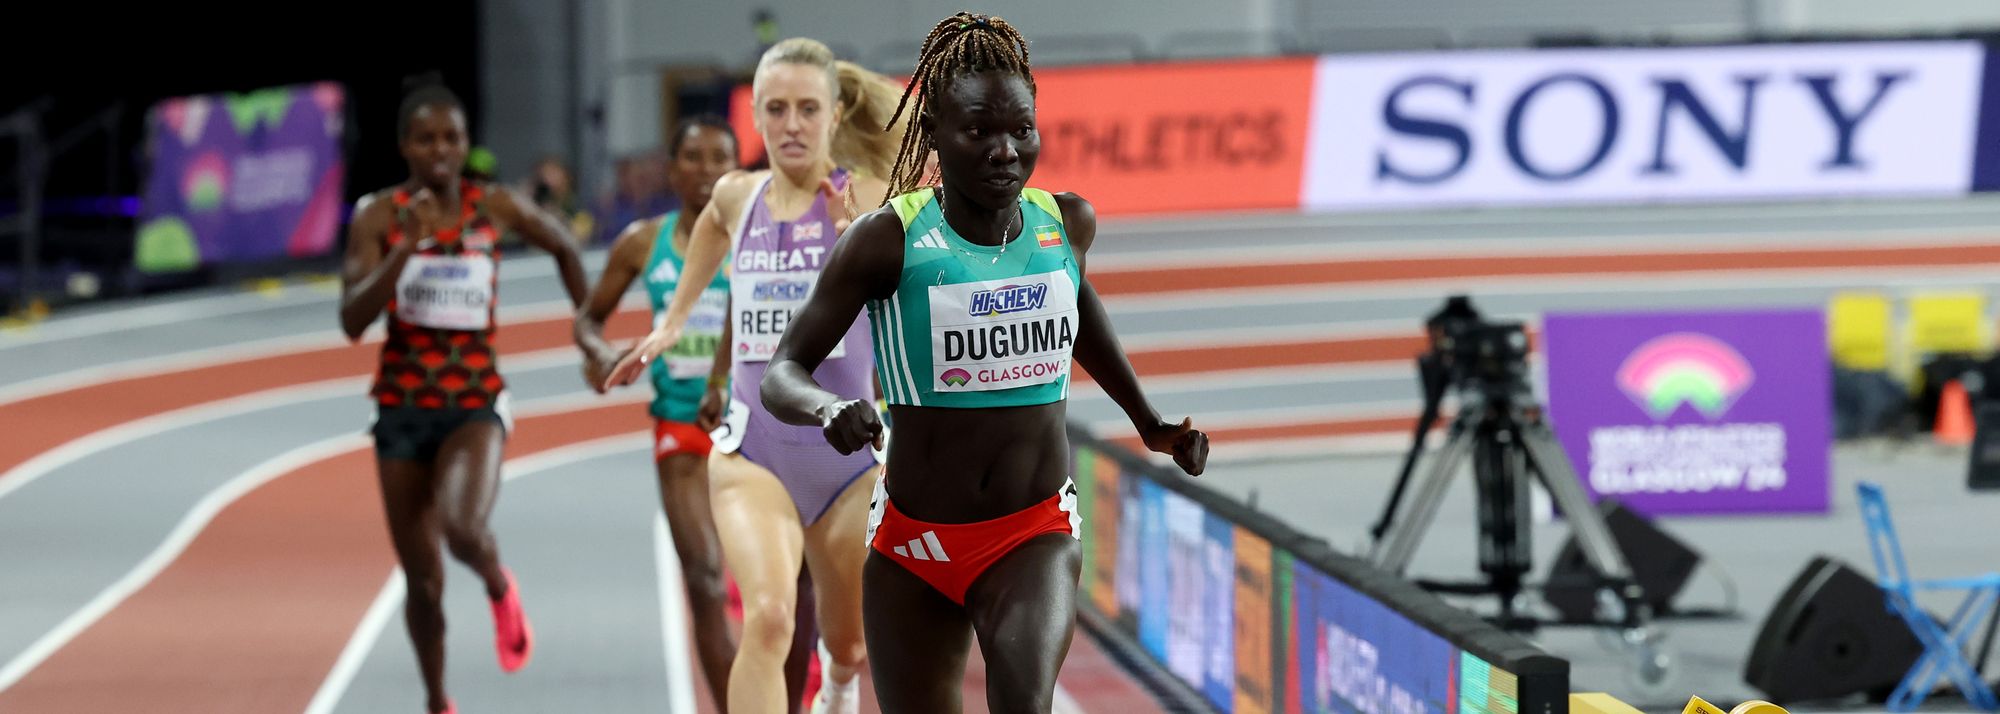 The women’s 800m uncovered a new star at the World Athletics Indoor Championships Glasgow 24